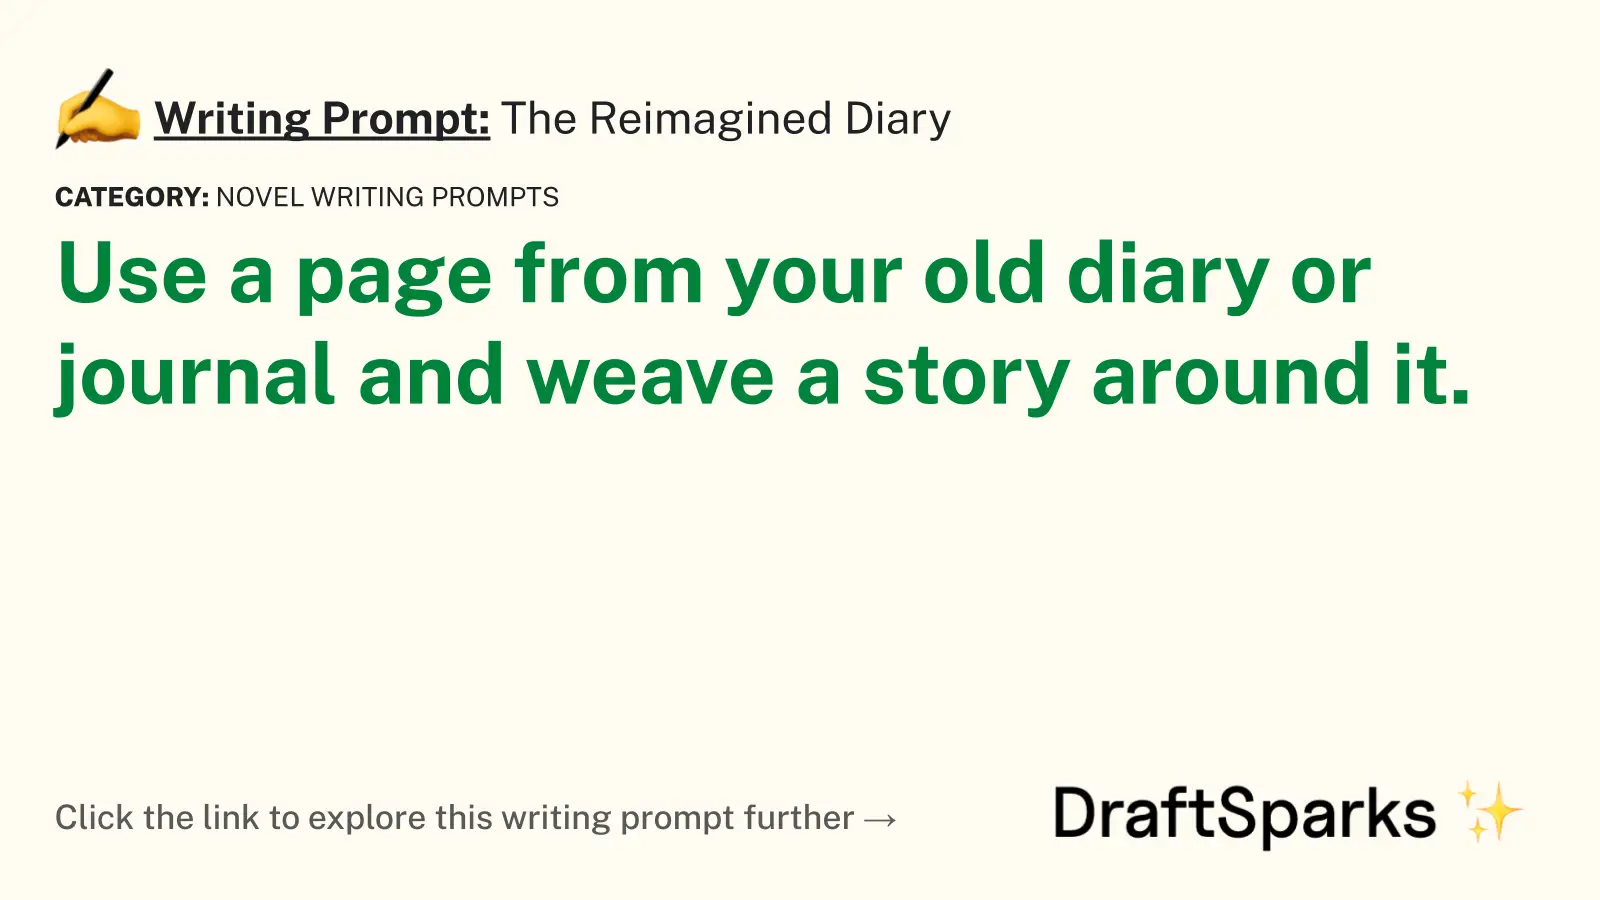 The Reimagined Diary